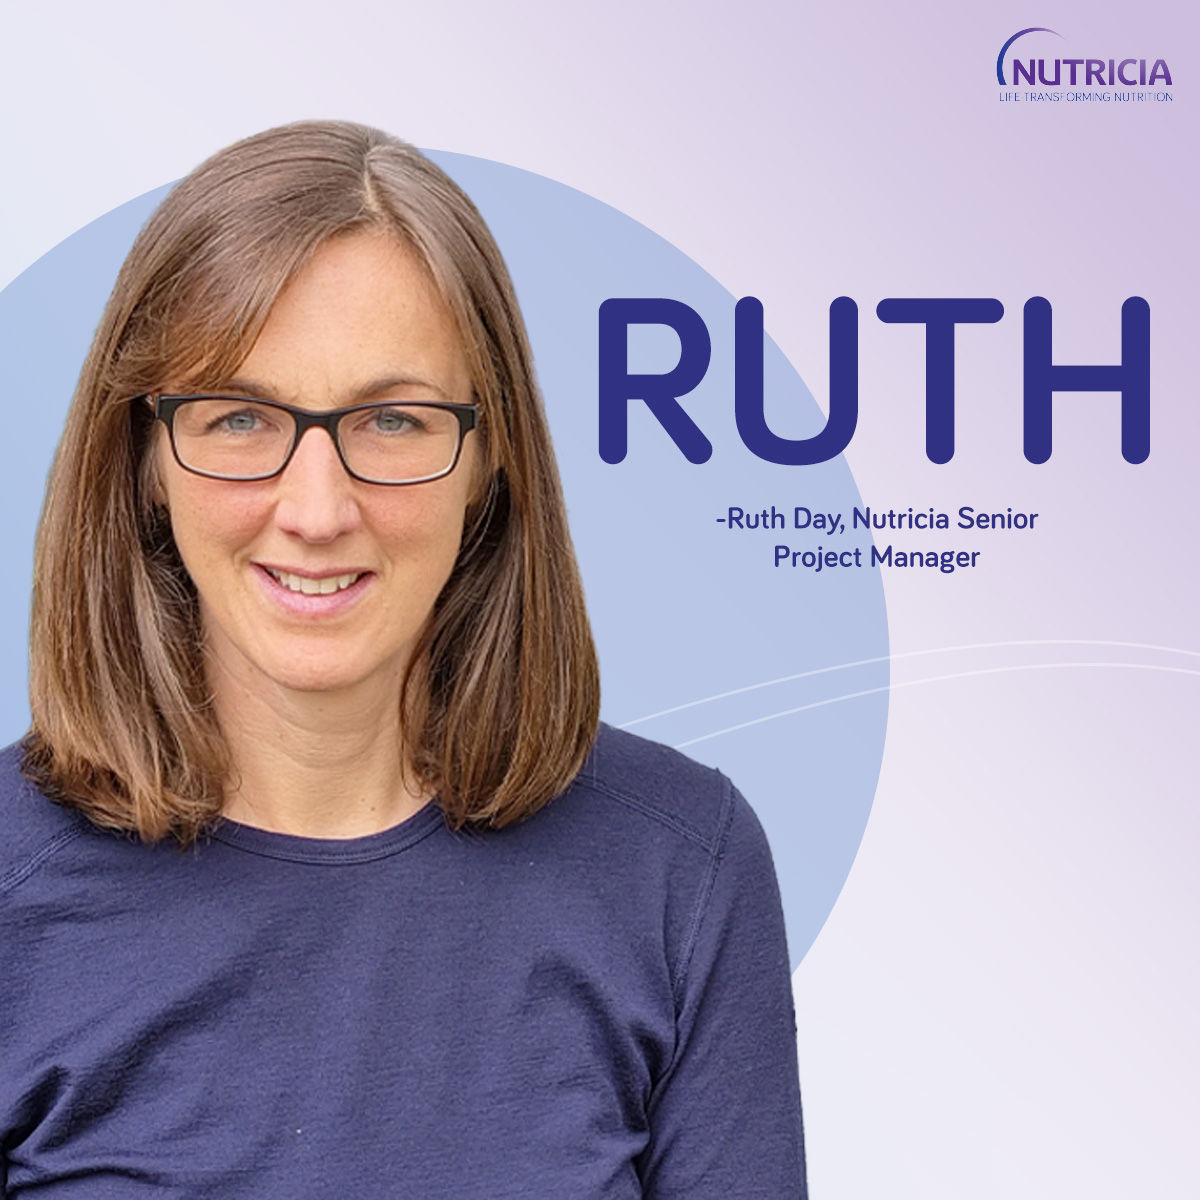 ruth-nutricialife